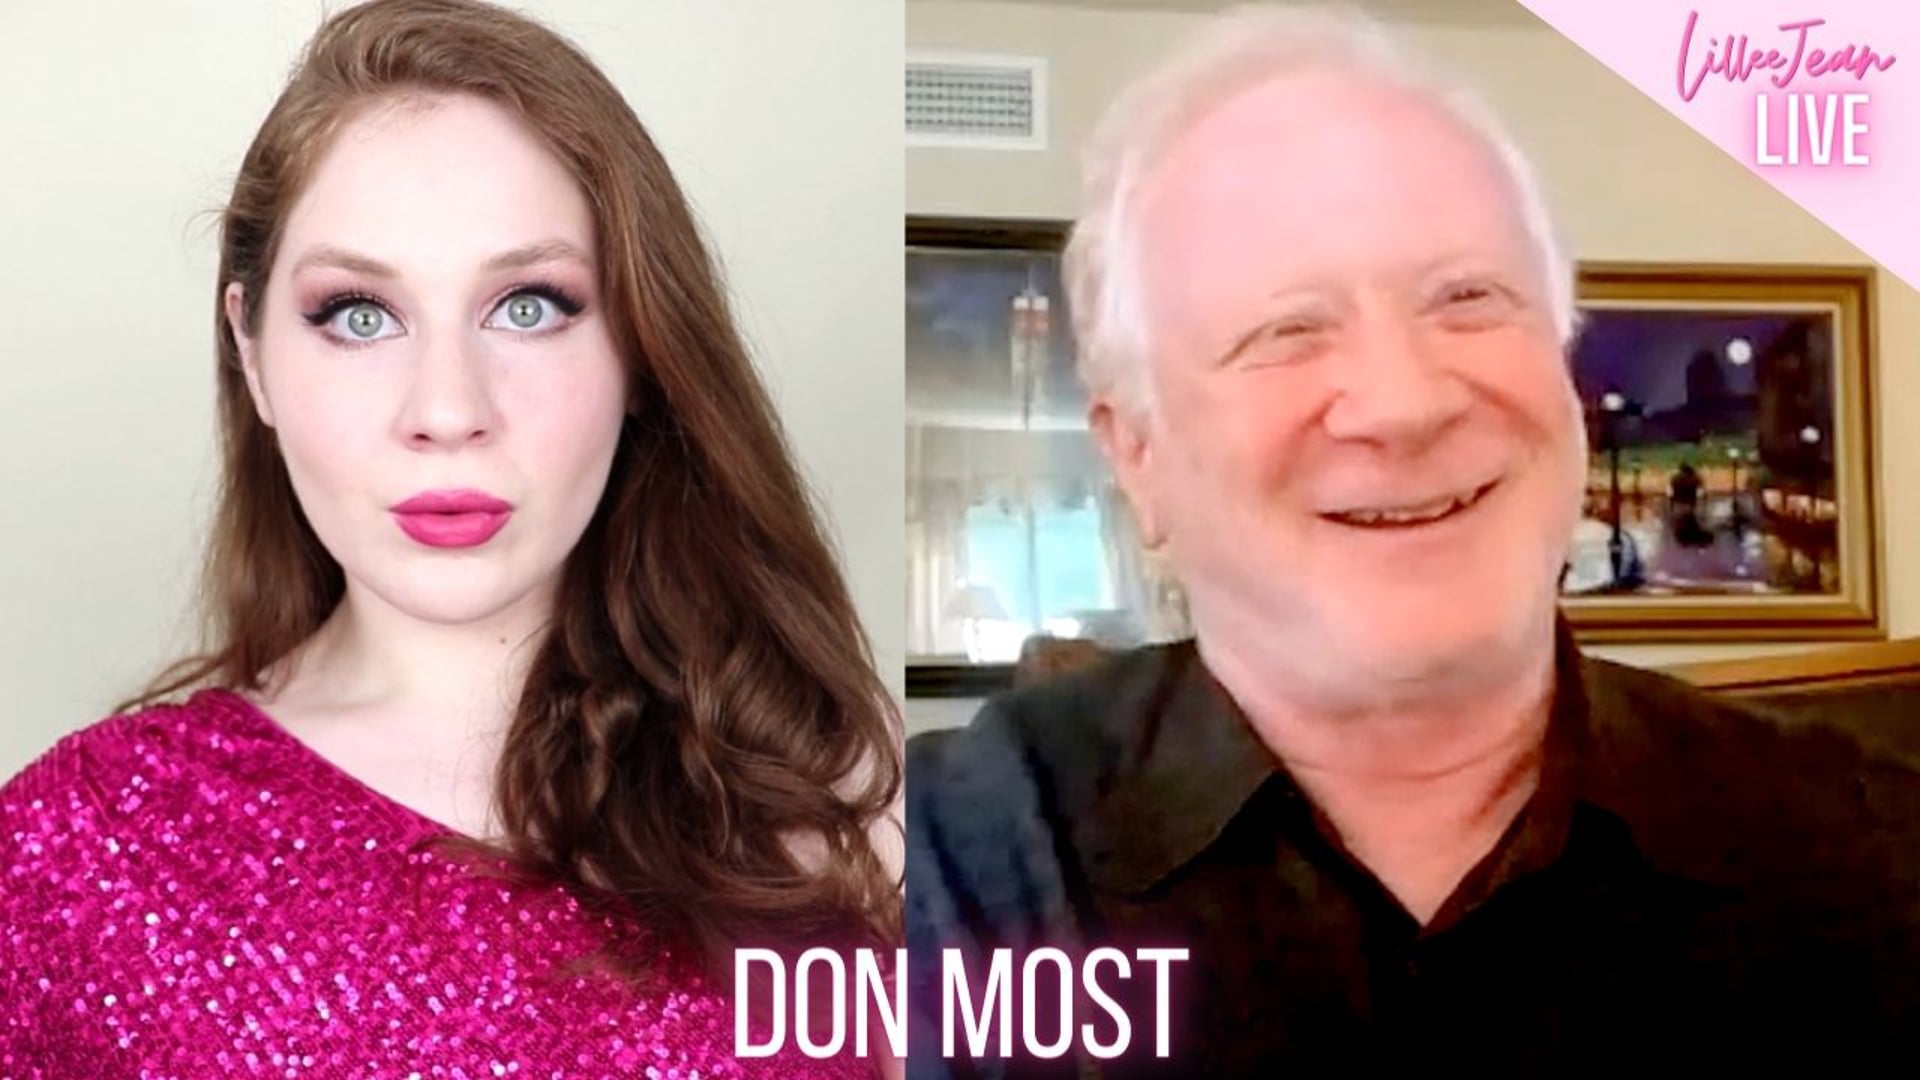 Lillee Jean TALKS! Live - Don Most - Hollywood TV Actor, Happy Days & Jazz Singer | Ep 3.04